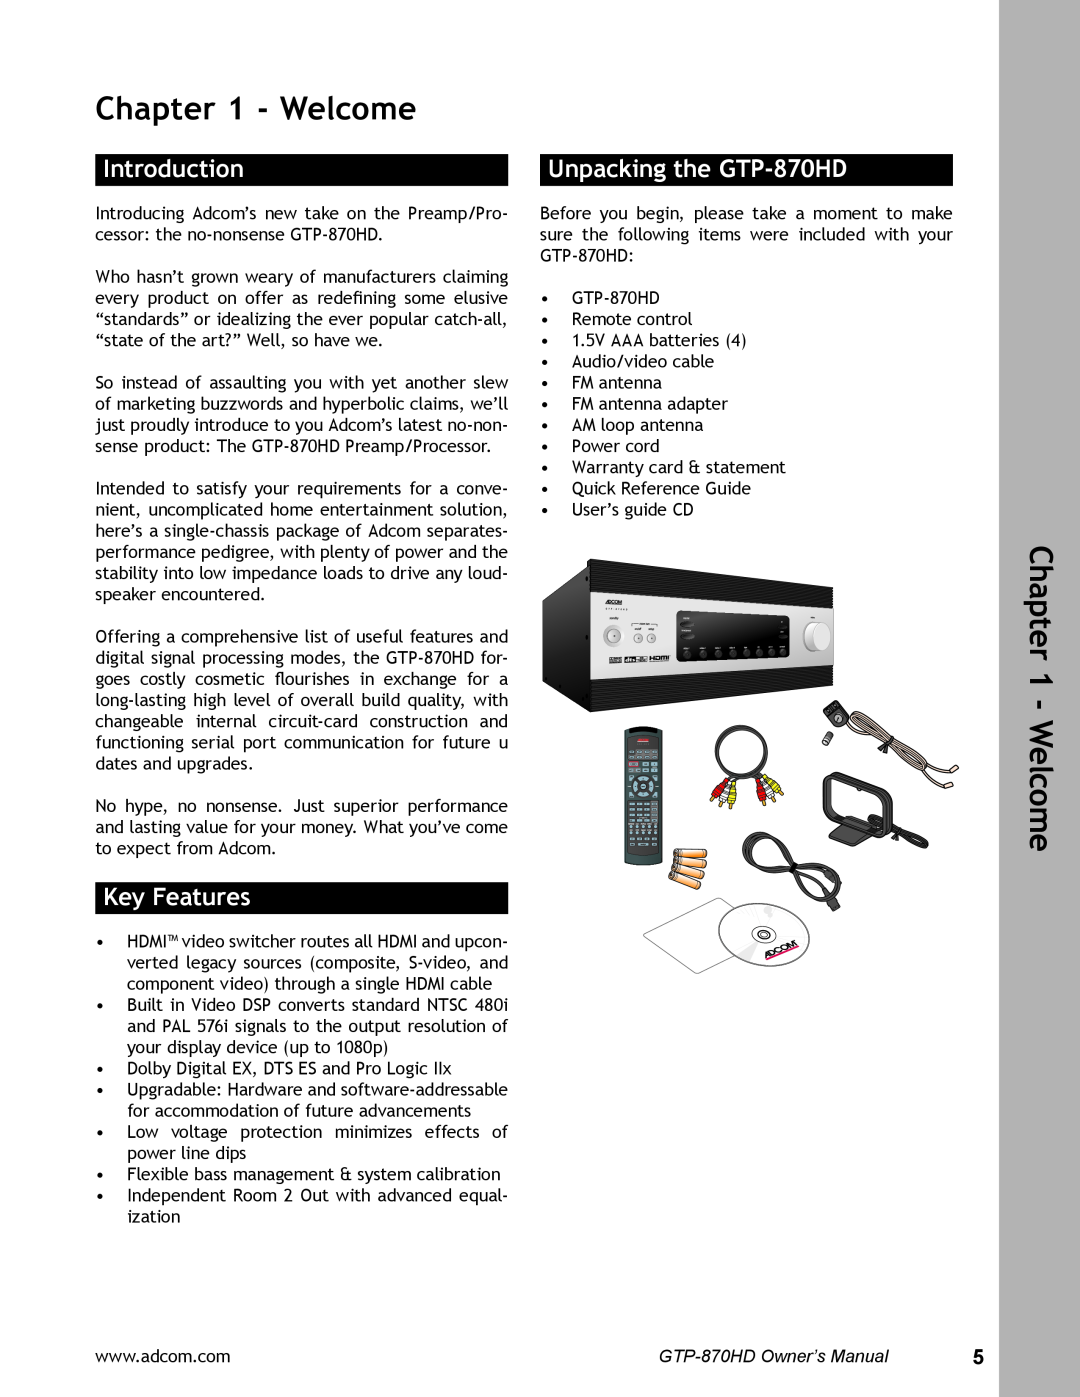 Adcom user manual Introduction, Key Features, Unpacking the GTP-870HD, Welcome 